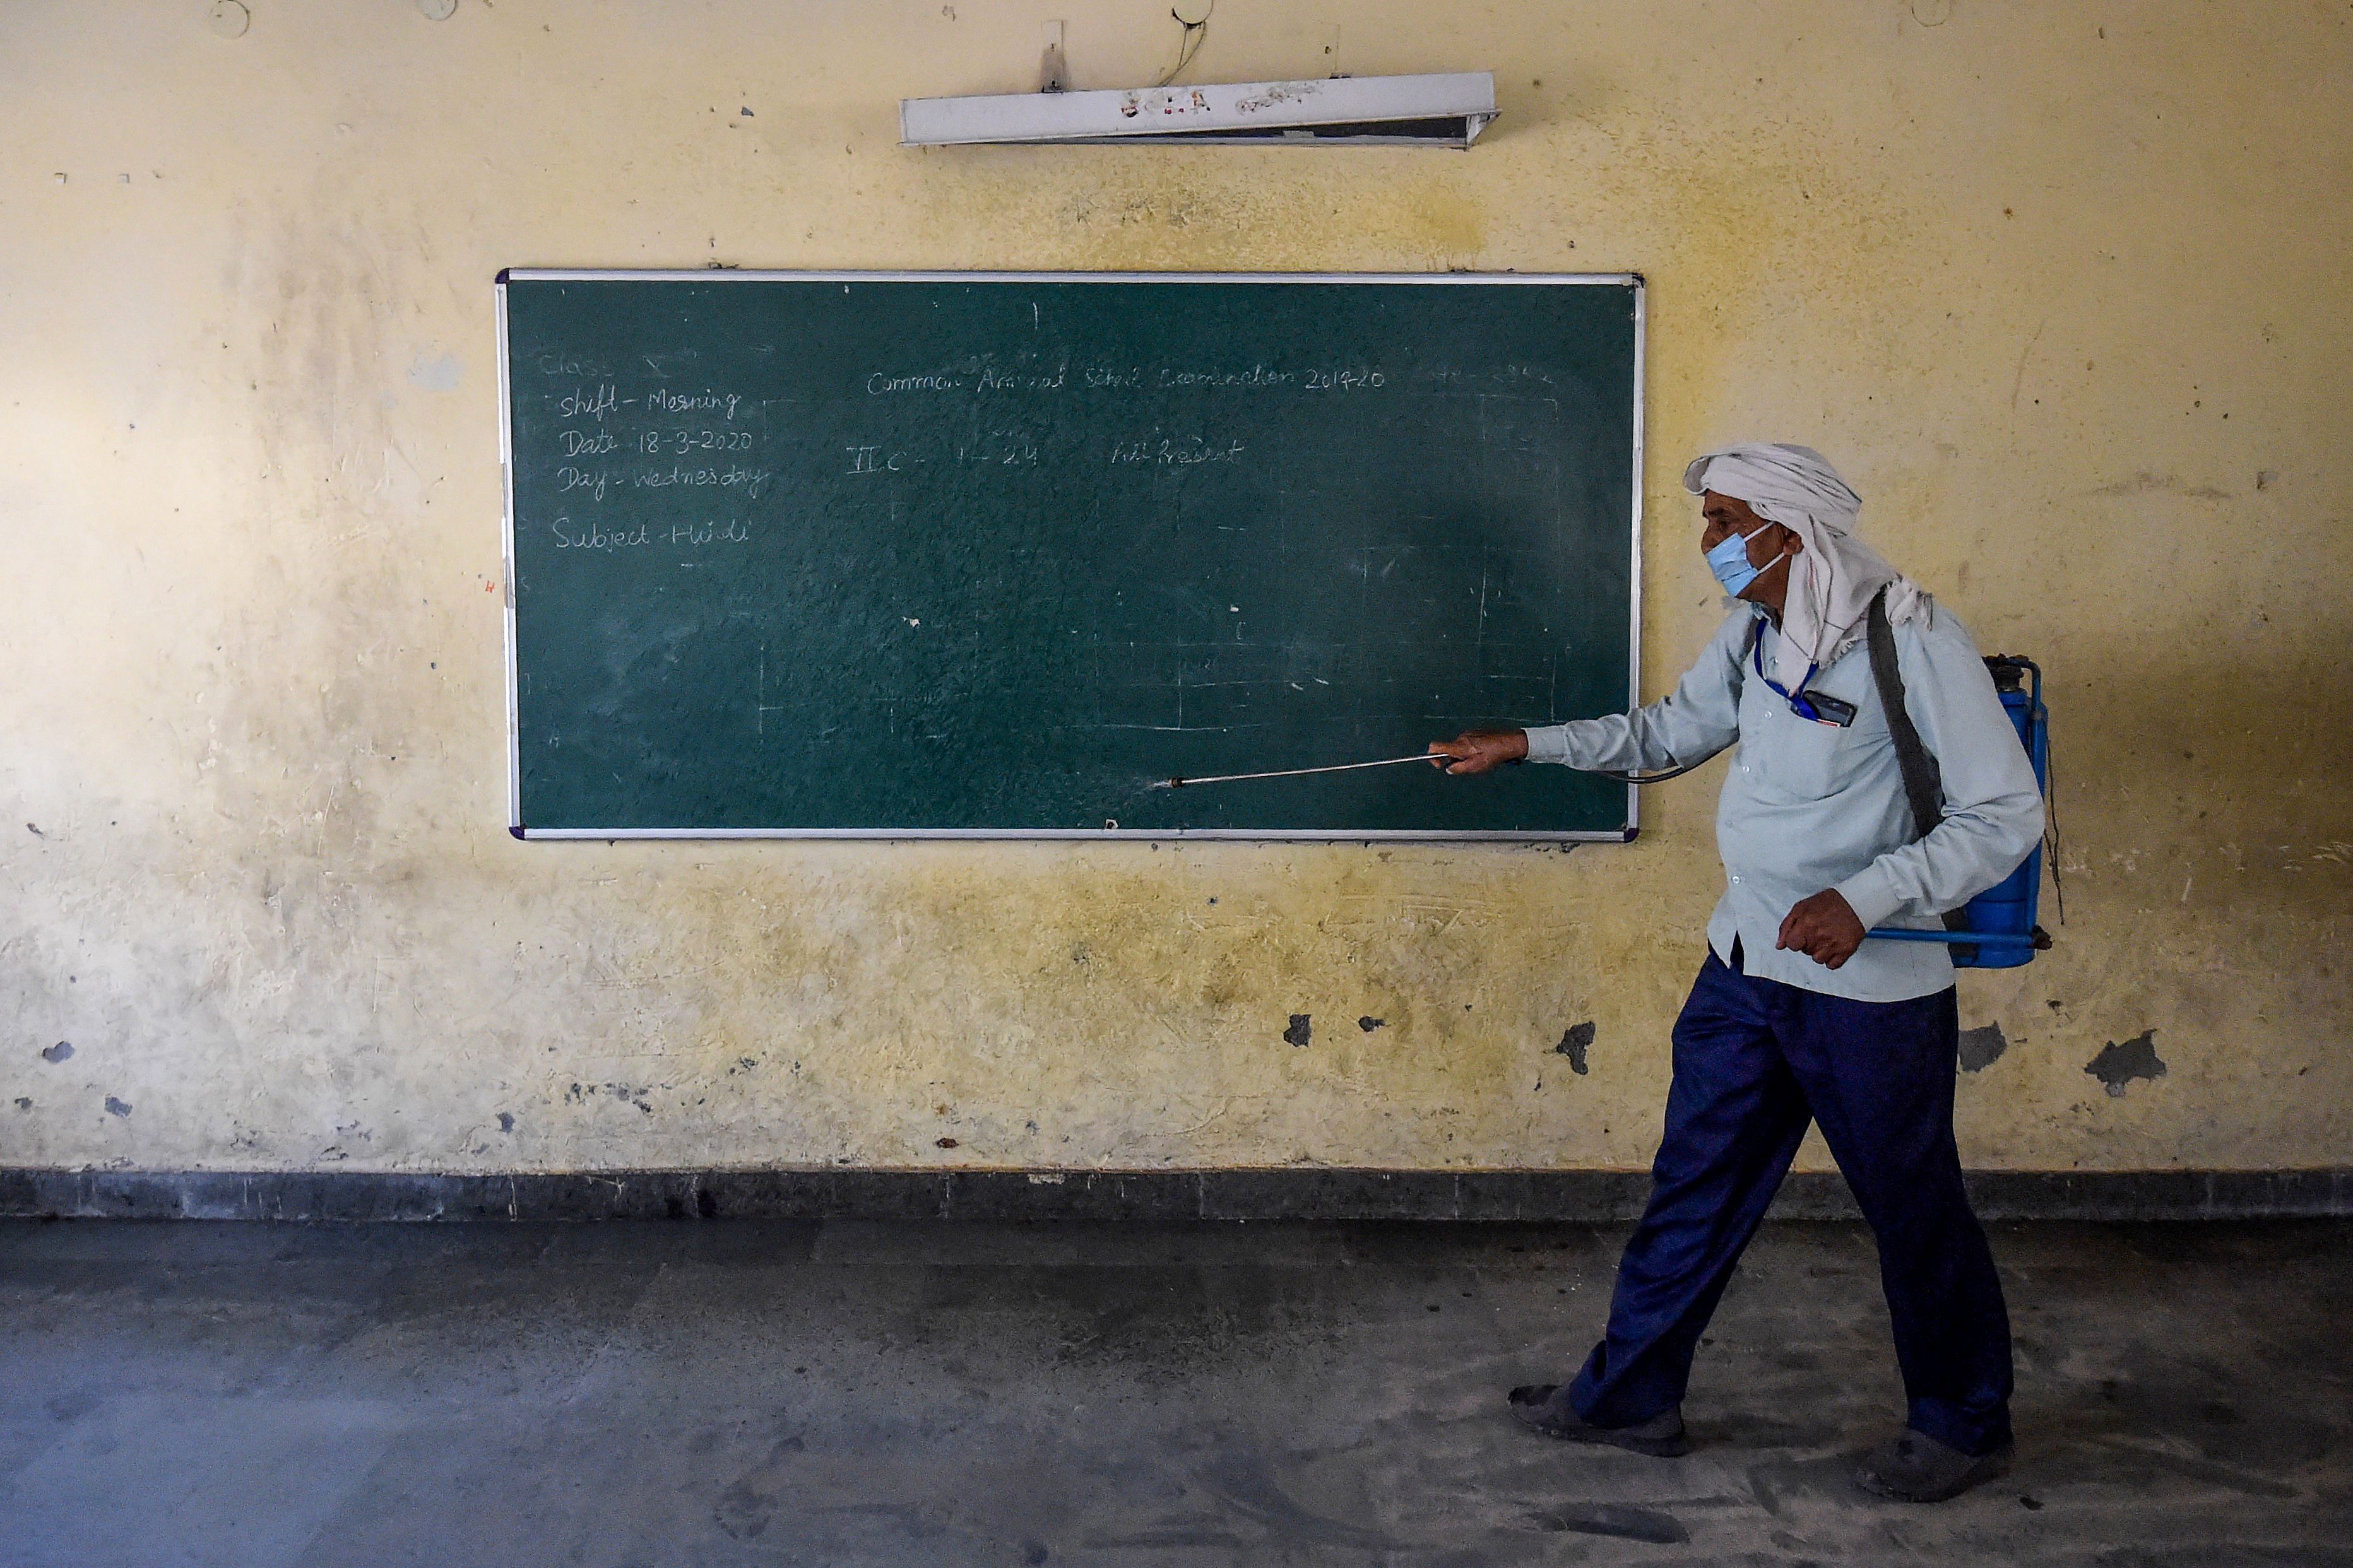  New Delhi: A worker disinfects a classroom of a government school where migrants are staying. (AFP)